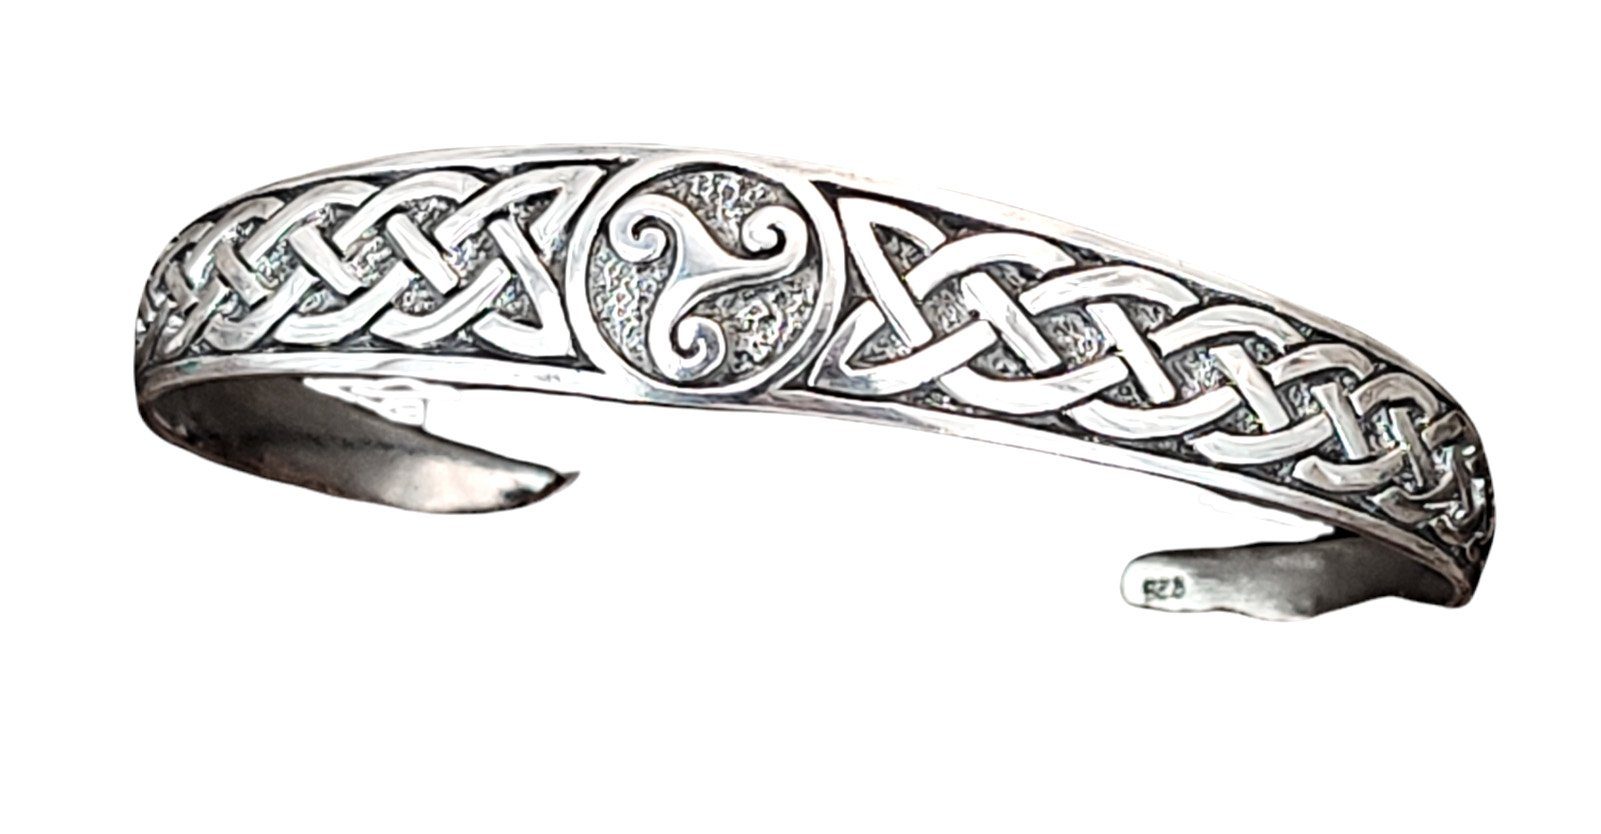 Kiss of Leather Silberarmband Armband Armreif 925 Sterling Silber Triskele  Knotenmuster ABTris